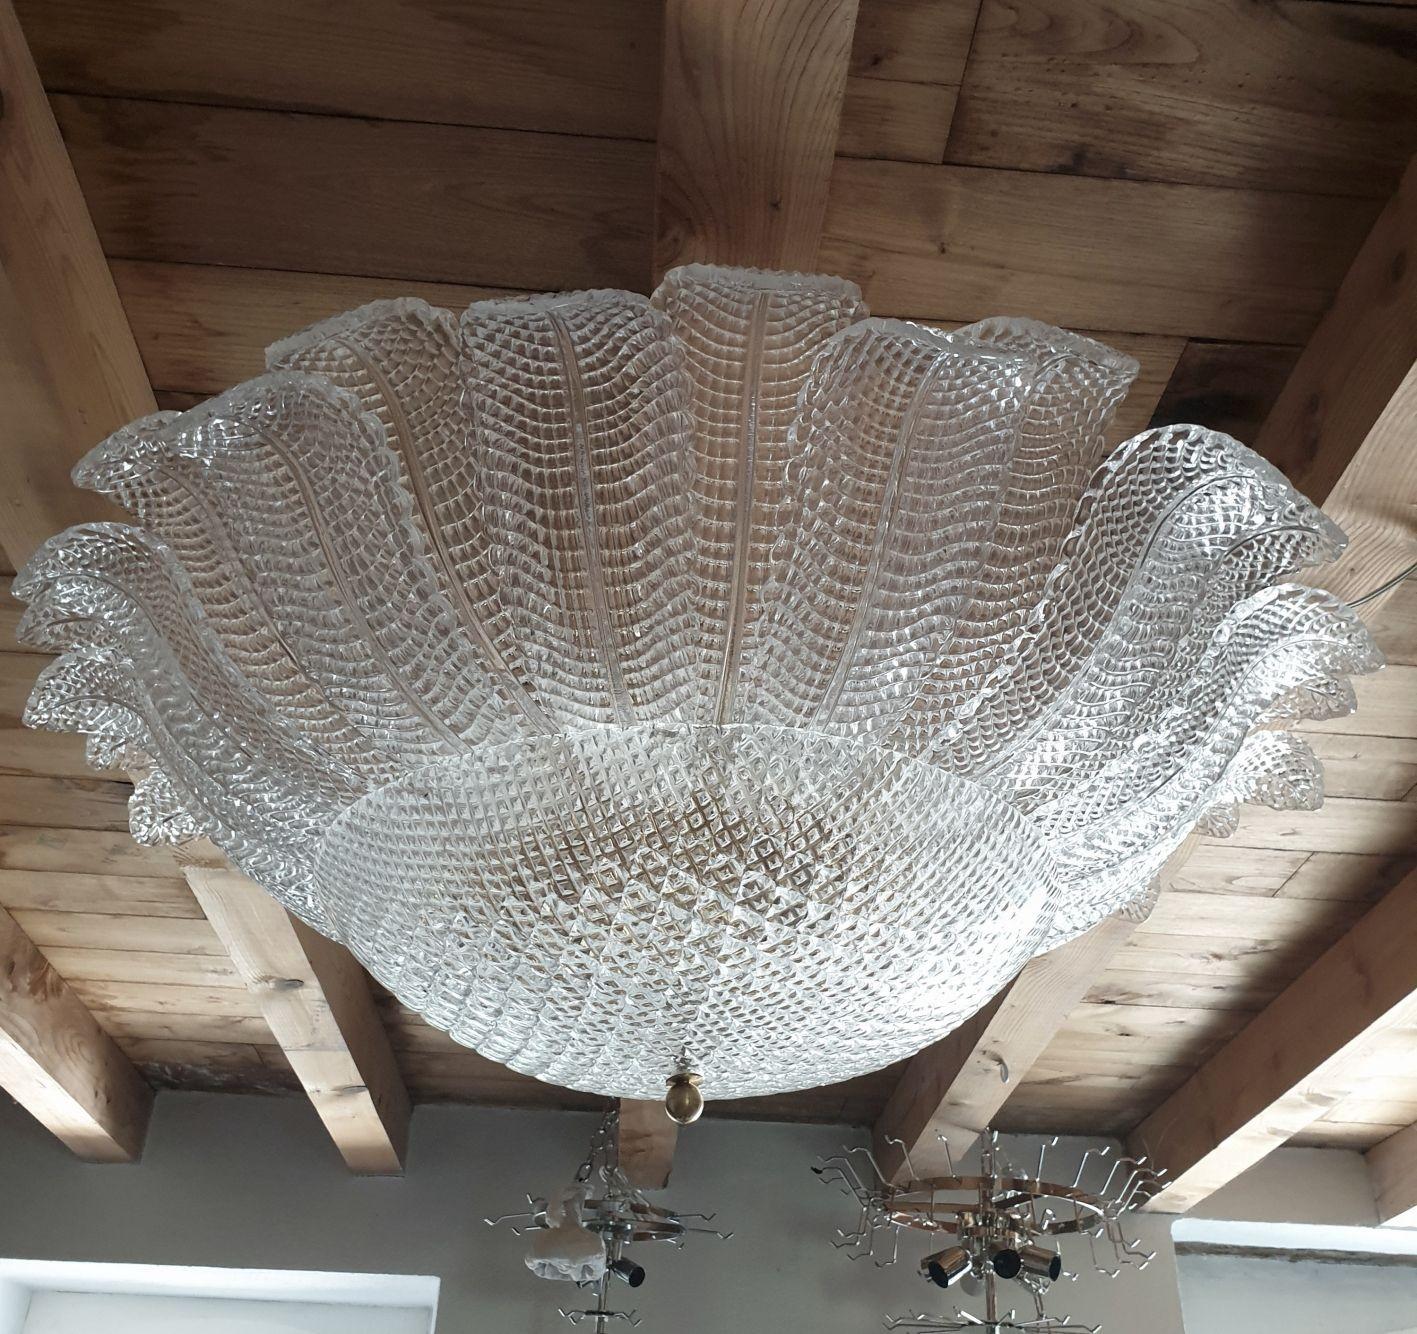 Very large Mid Century Modern Murano glass flush mount chandelier, attributed to Barovier & Toso, Italy 1970s.
The huge chandelier is made of clear Murano glass leaves, with a grid pattern, making them translucent through the light.
This pattern is